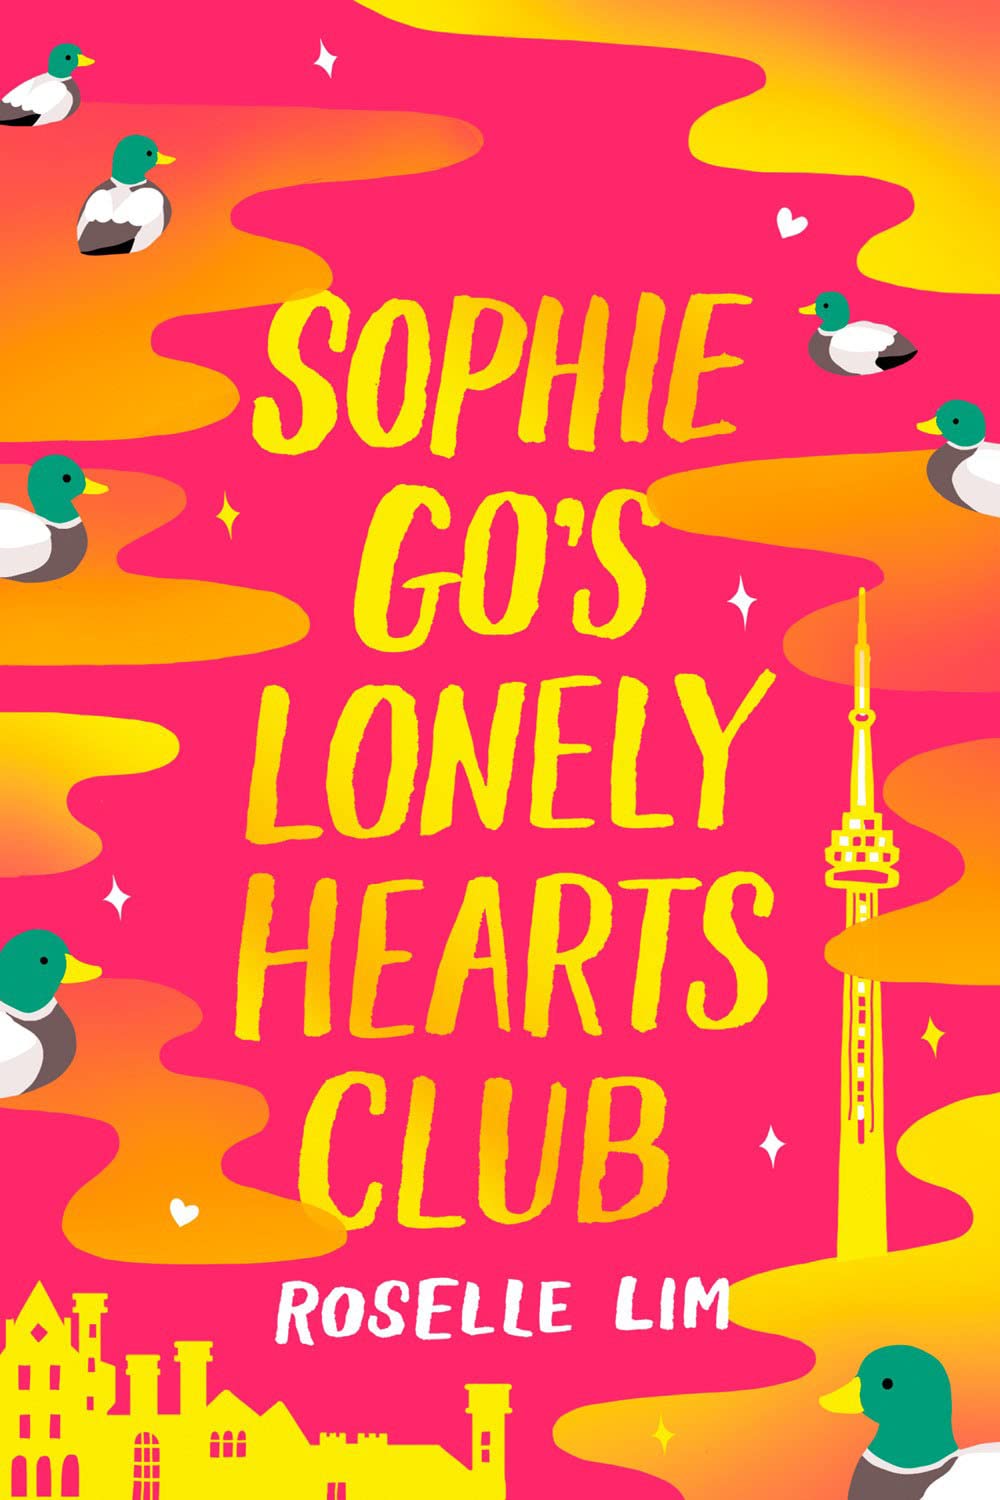 Image for "Sophie Gos' Lonely Hearts Club"